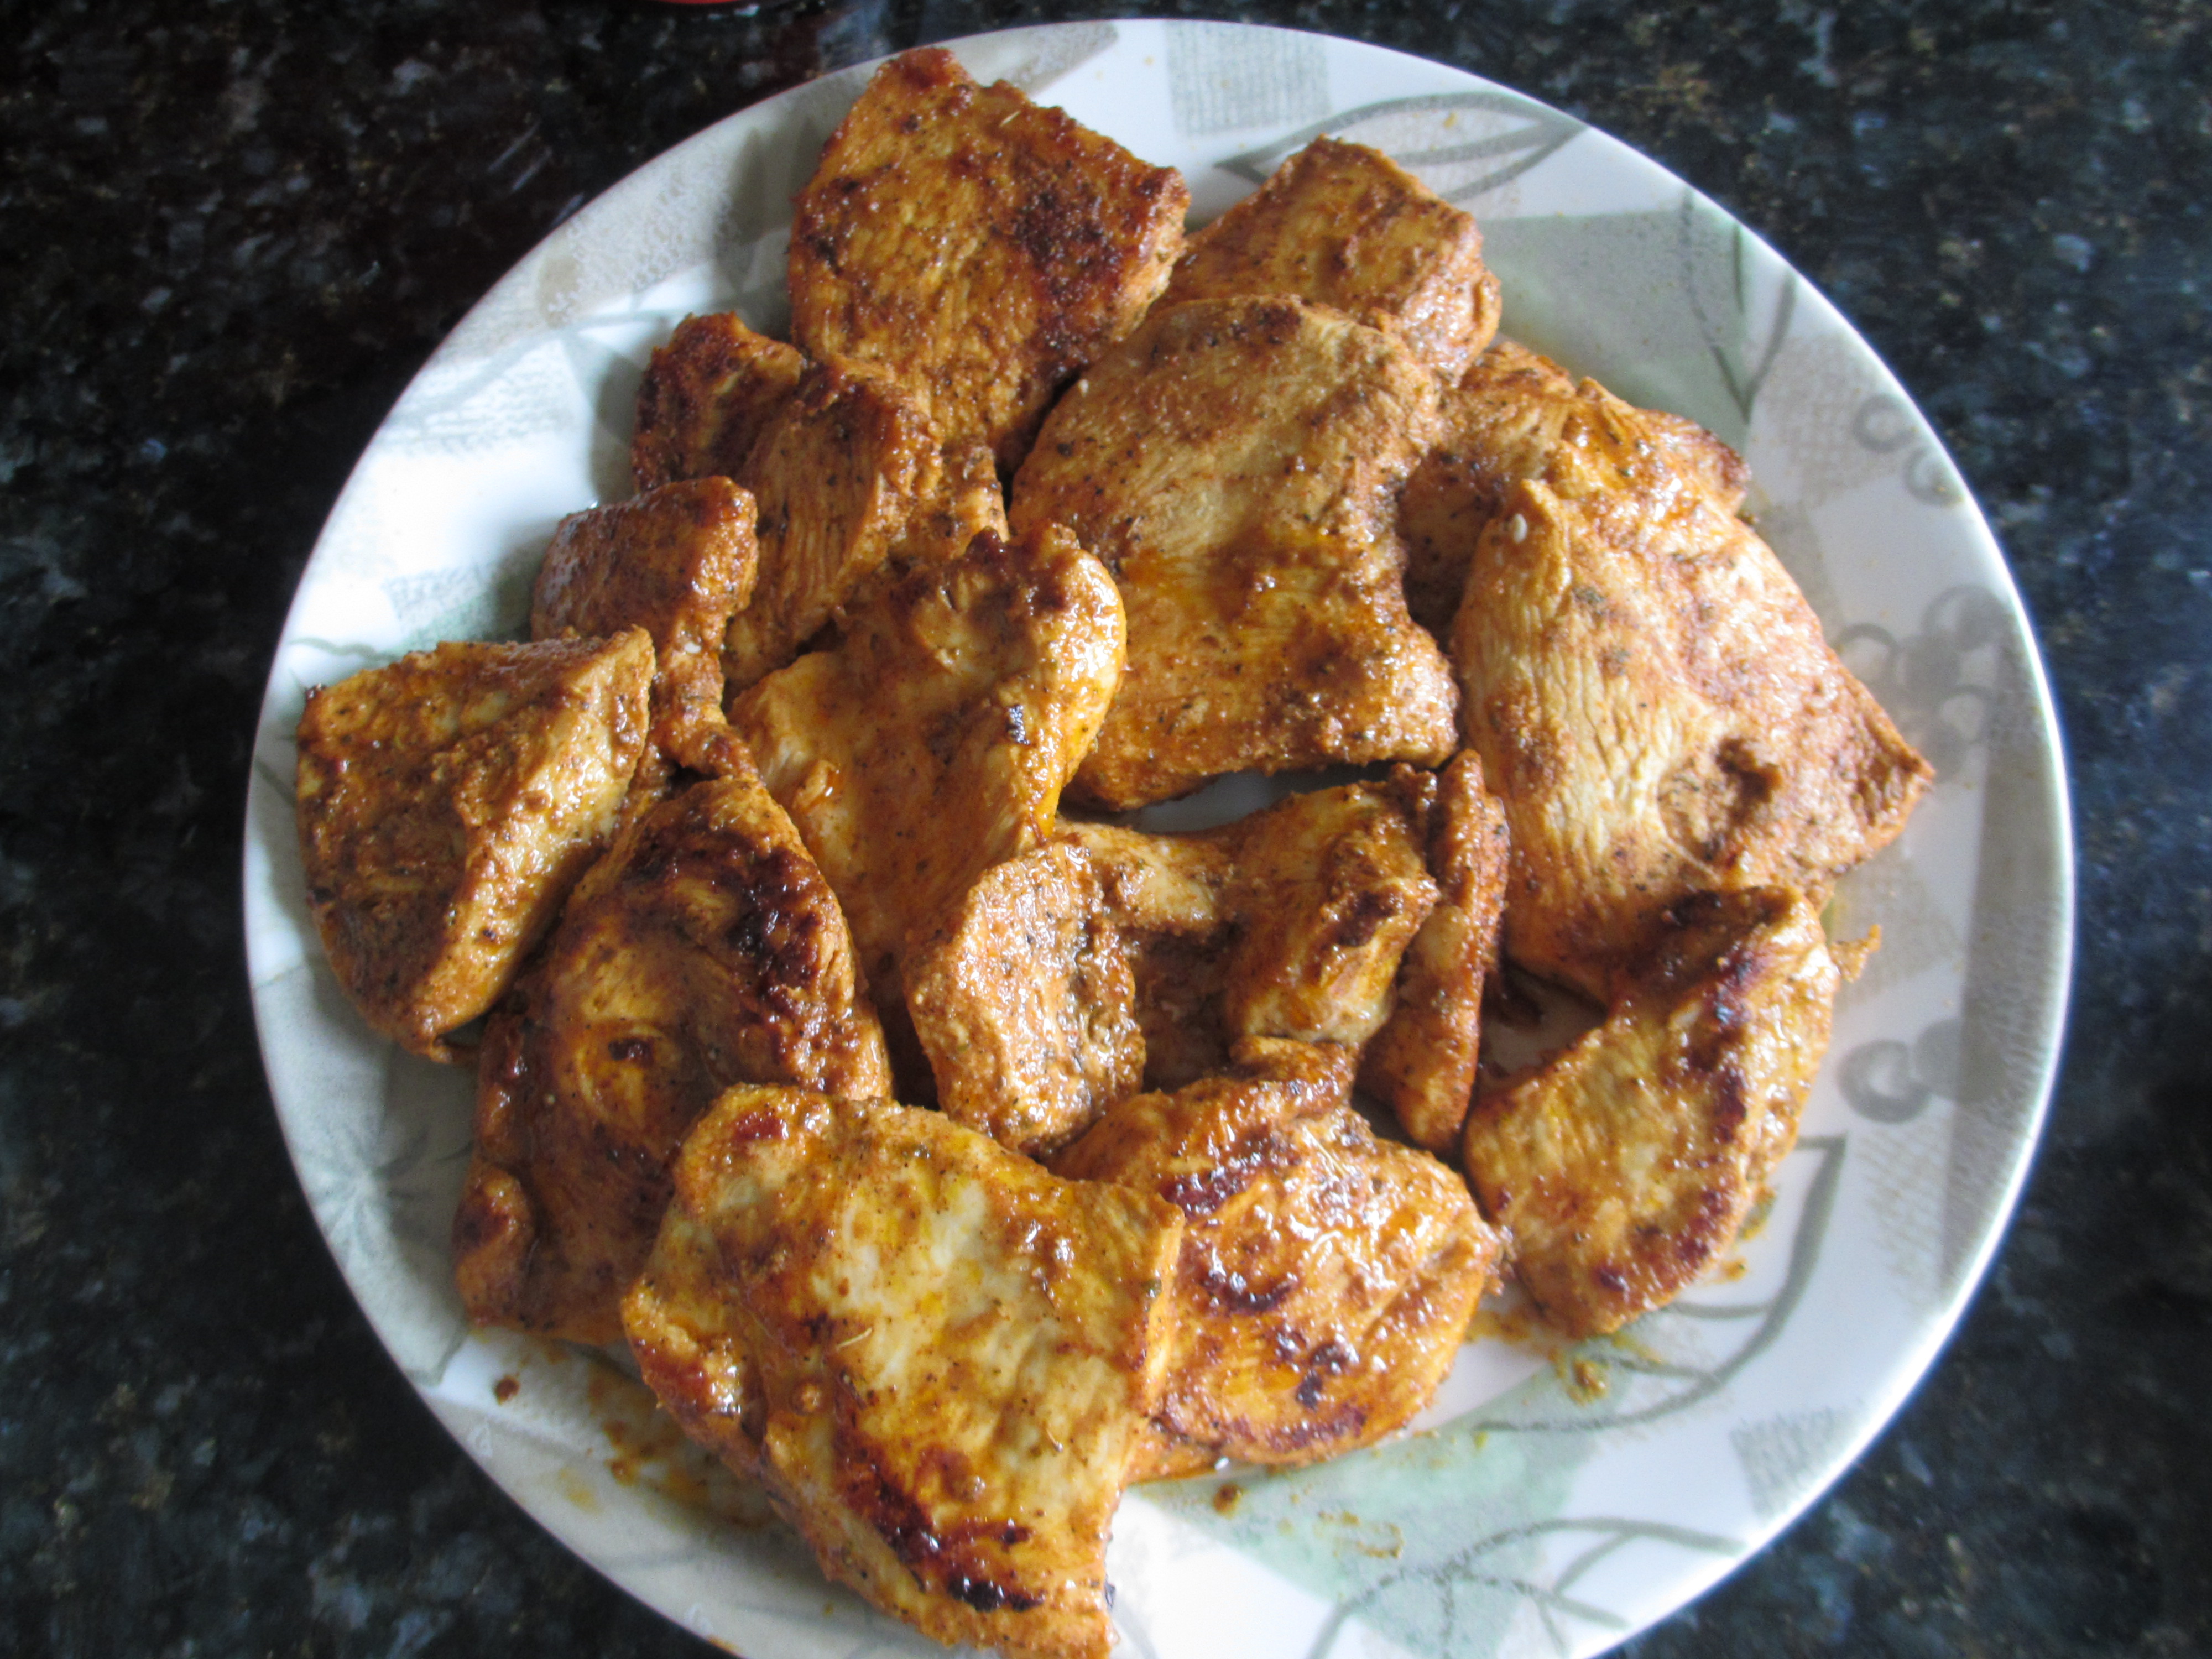 Cooked chicken